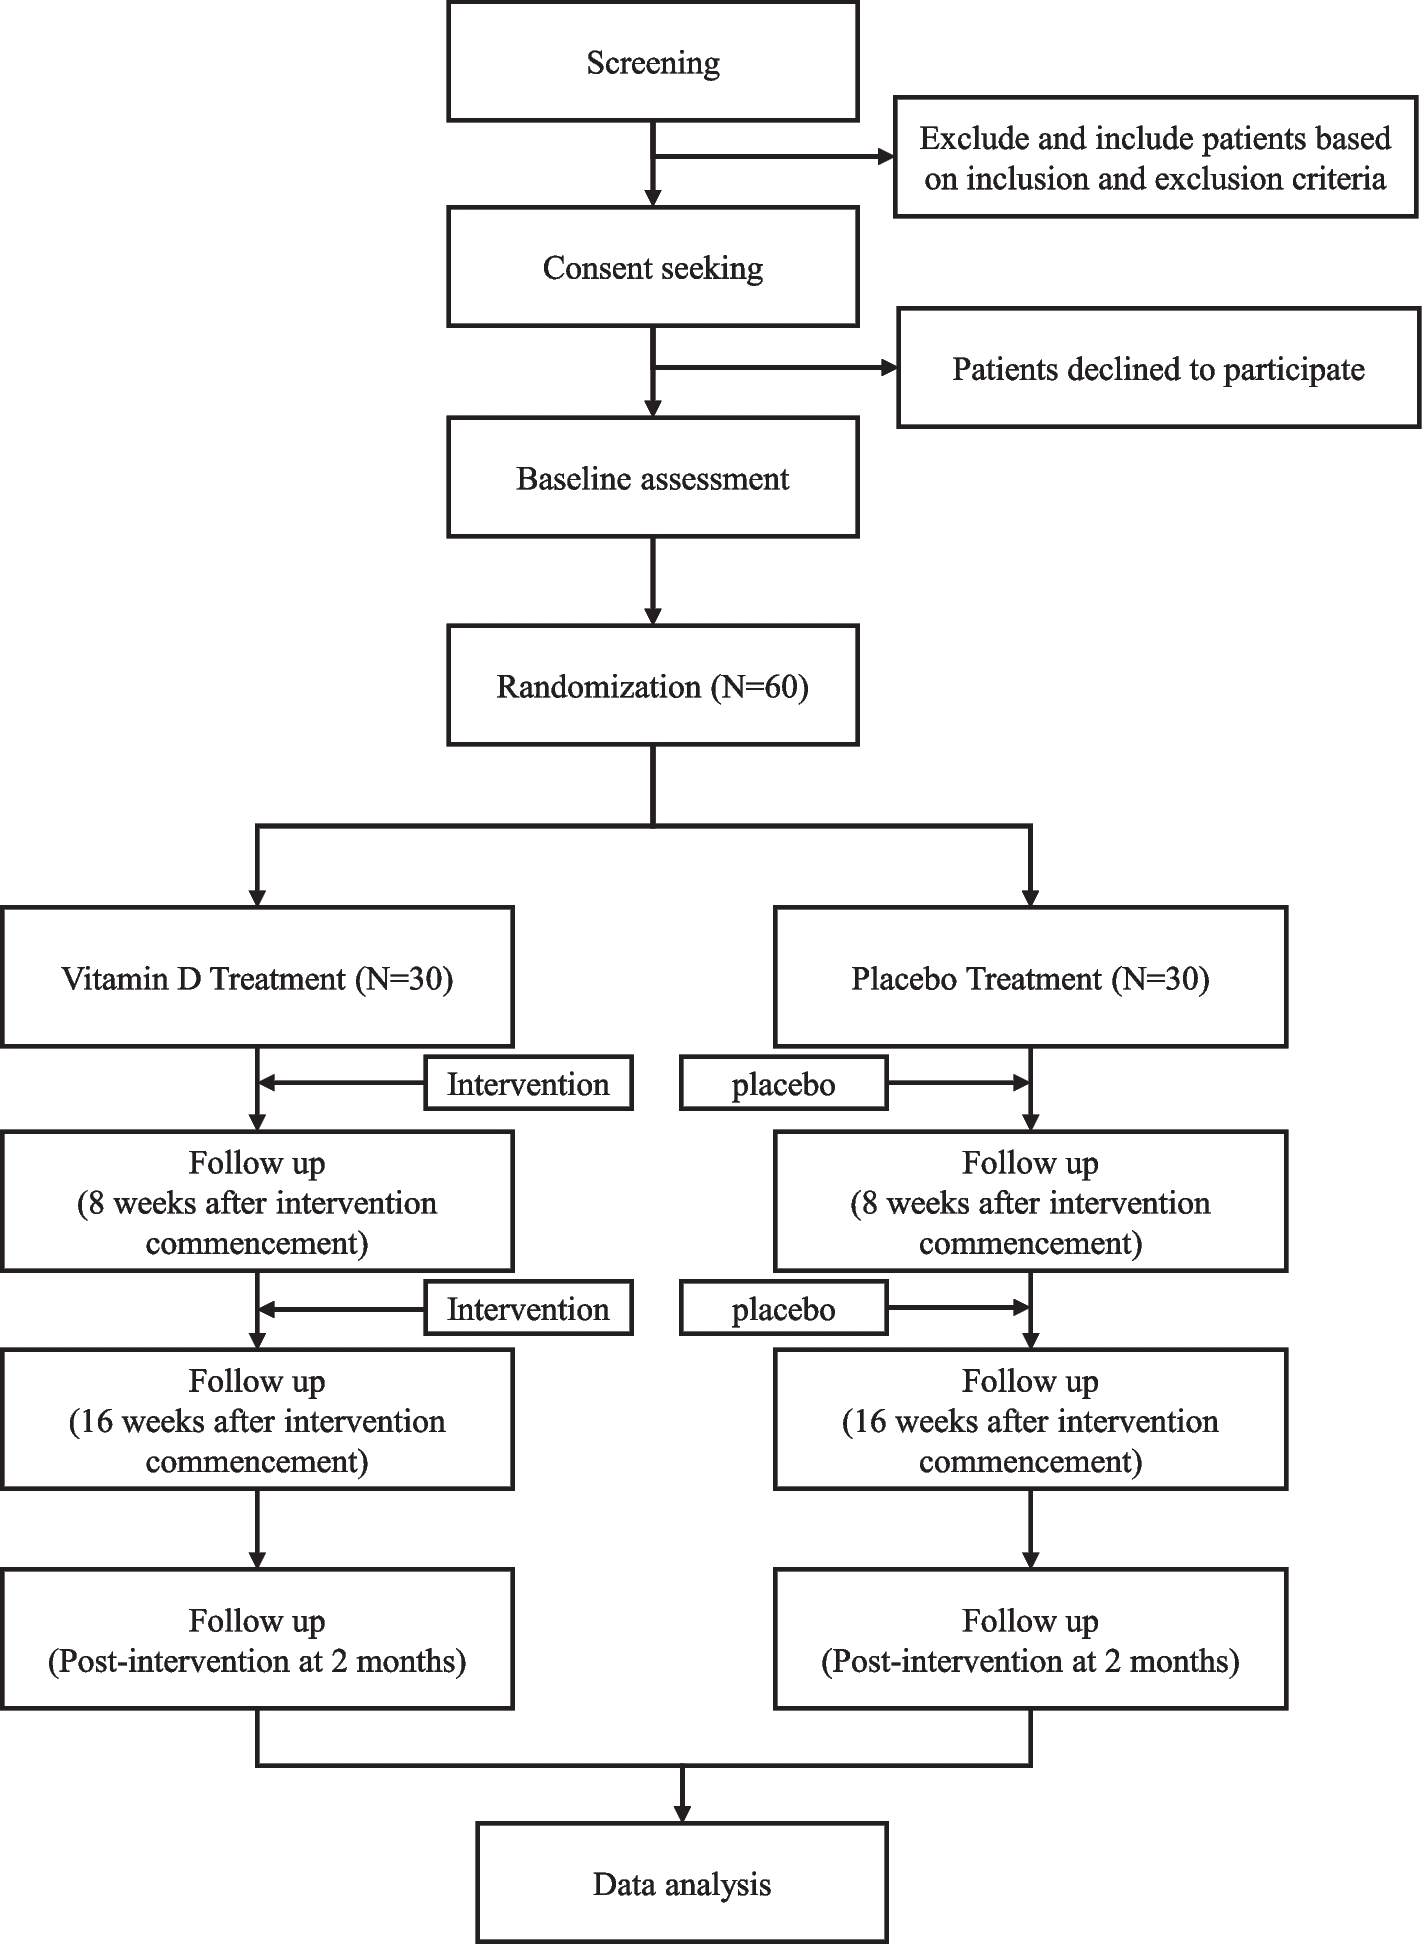 Vitamin D as an intervention for improving quadriceps muscle strength in patients after anterior cruciate ligament reconstruction: study protocol for a randomized double-blinded, placebo-controlled clinical trial